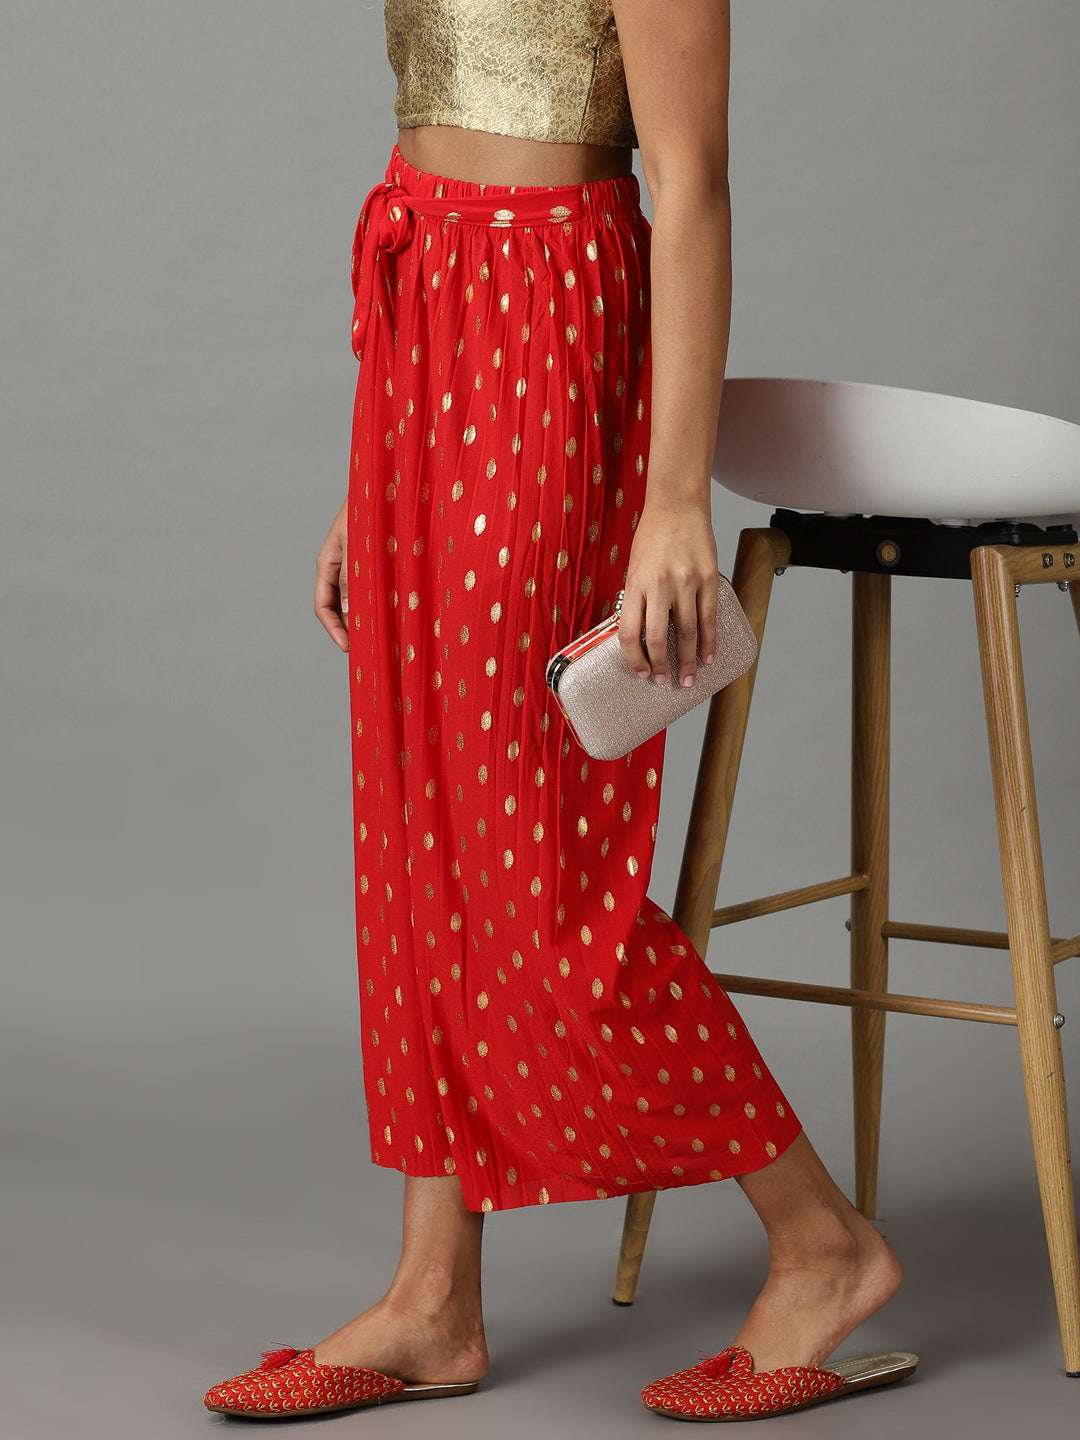 Women's Red Printed Parallel Trouser